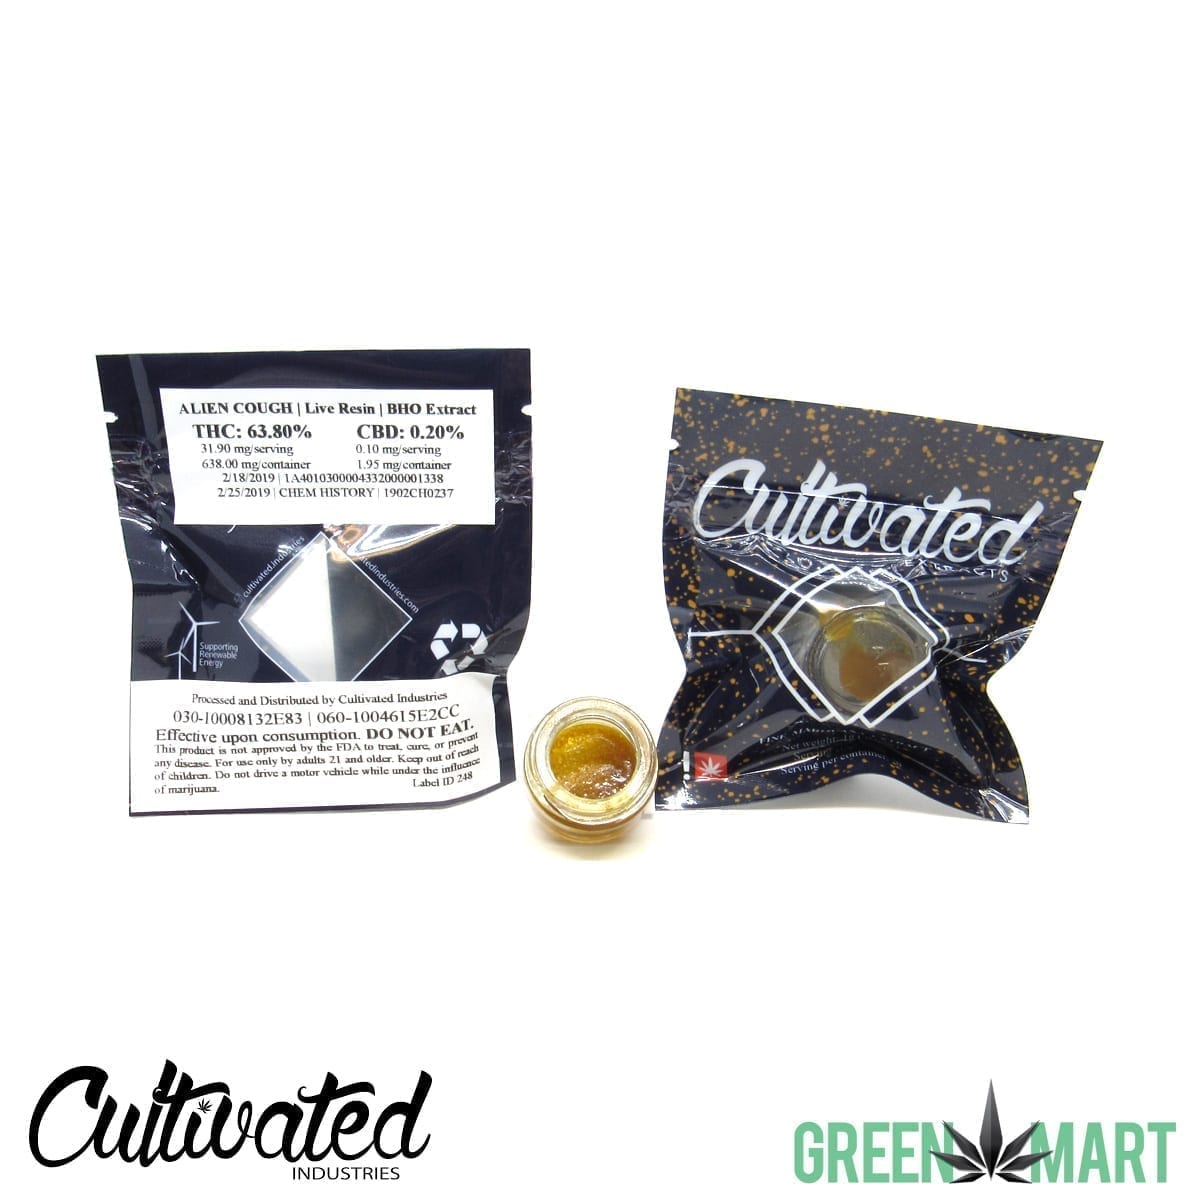 Cultivated Industries - Alien Cough Live Resin